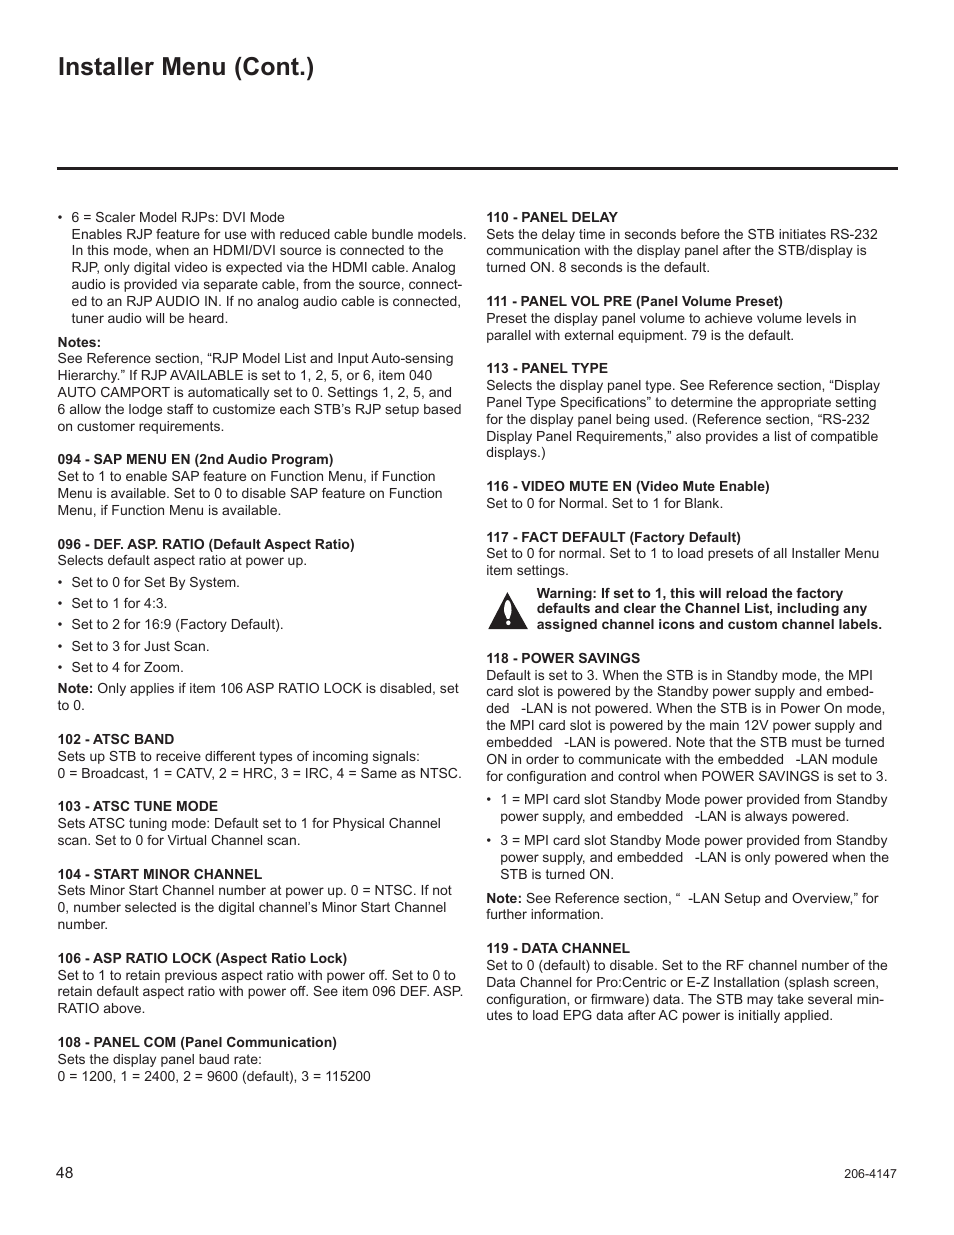 Installer menu (cont.) | LG STB1000 User Manual | Page 48 / 86